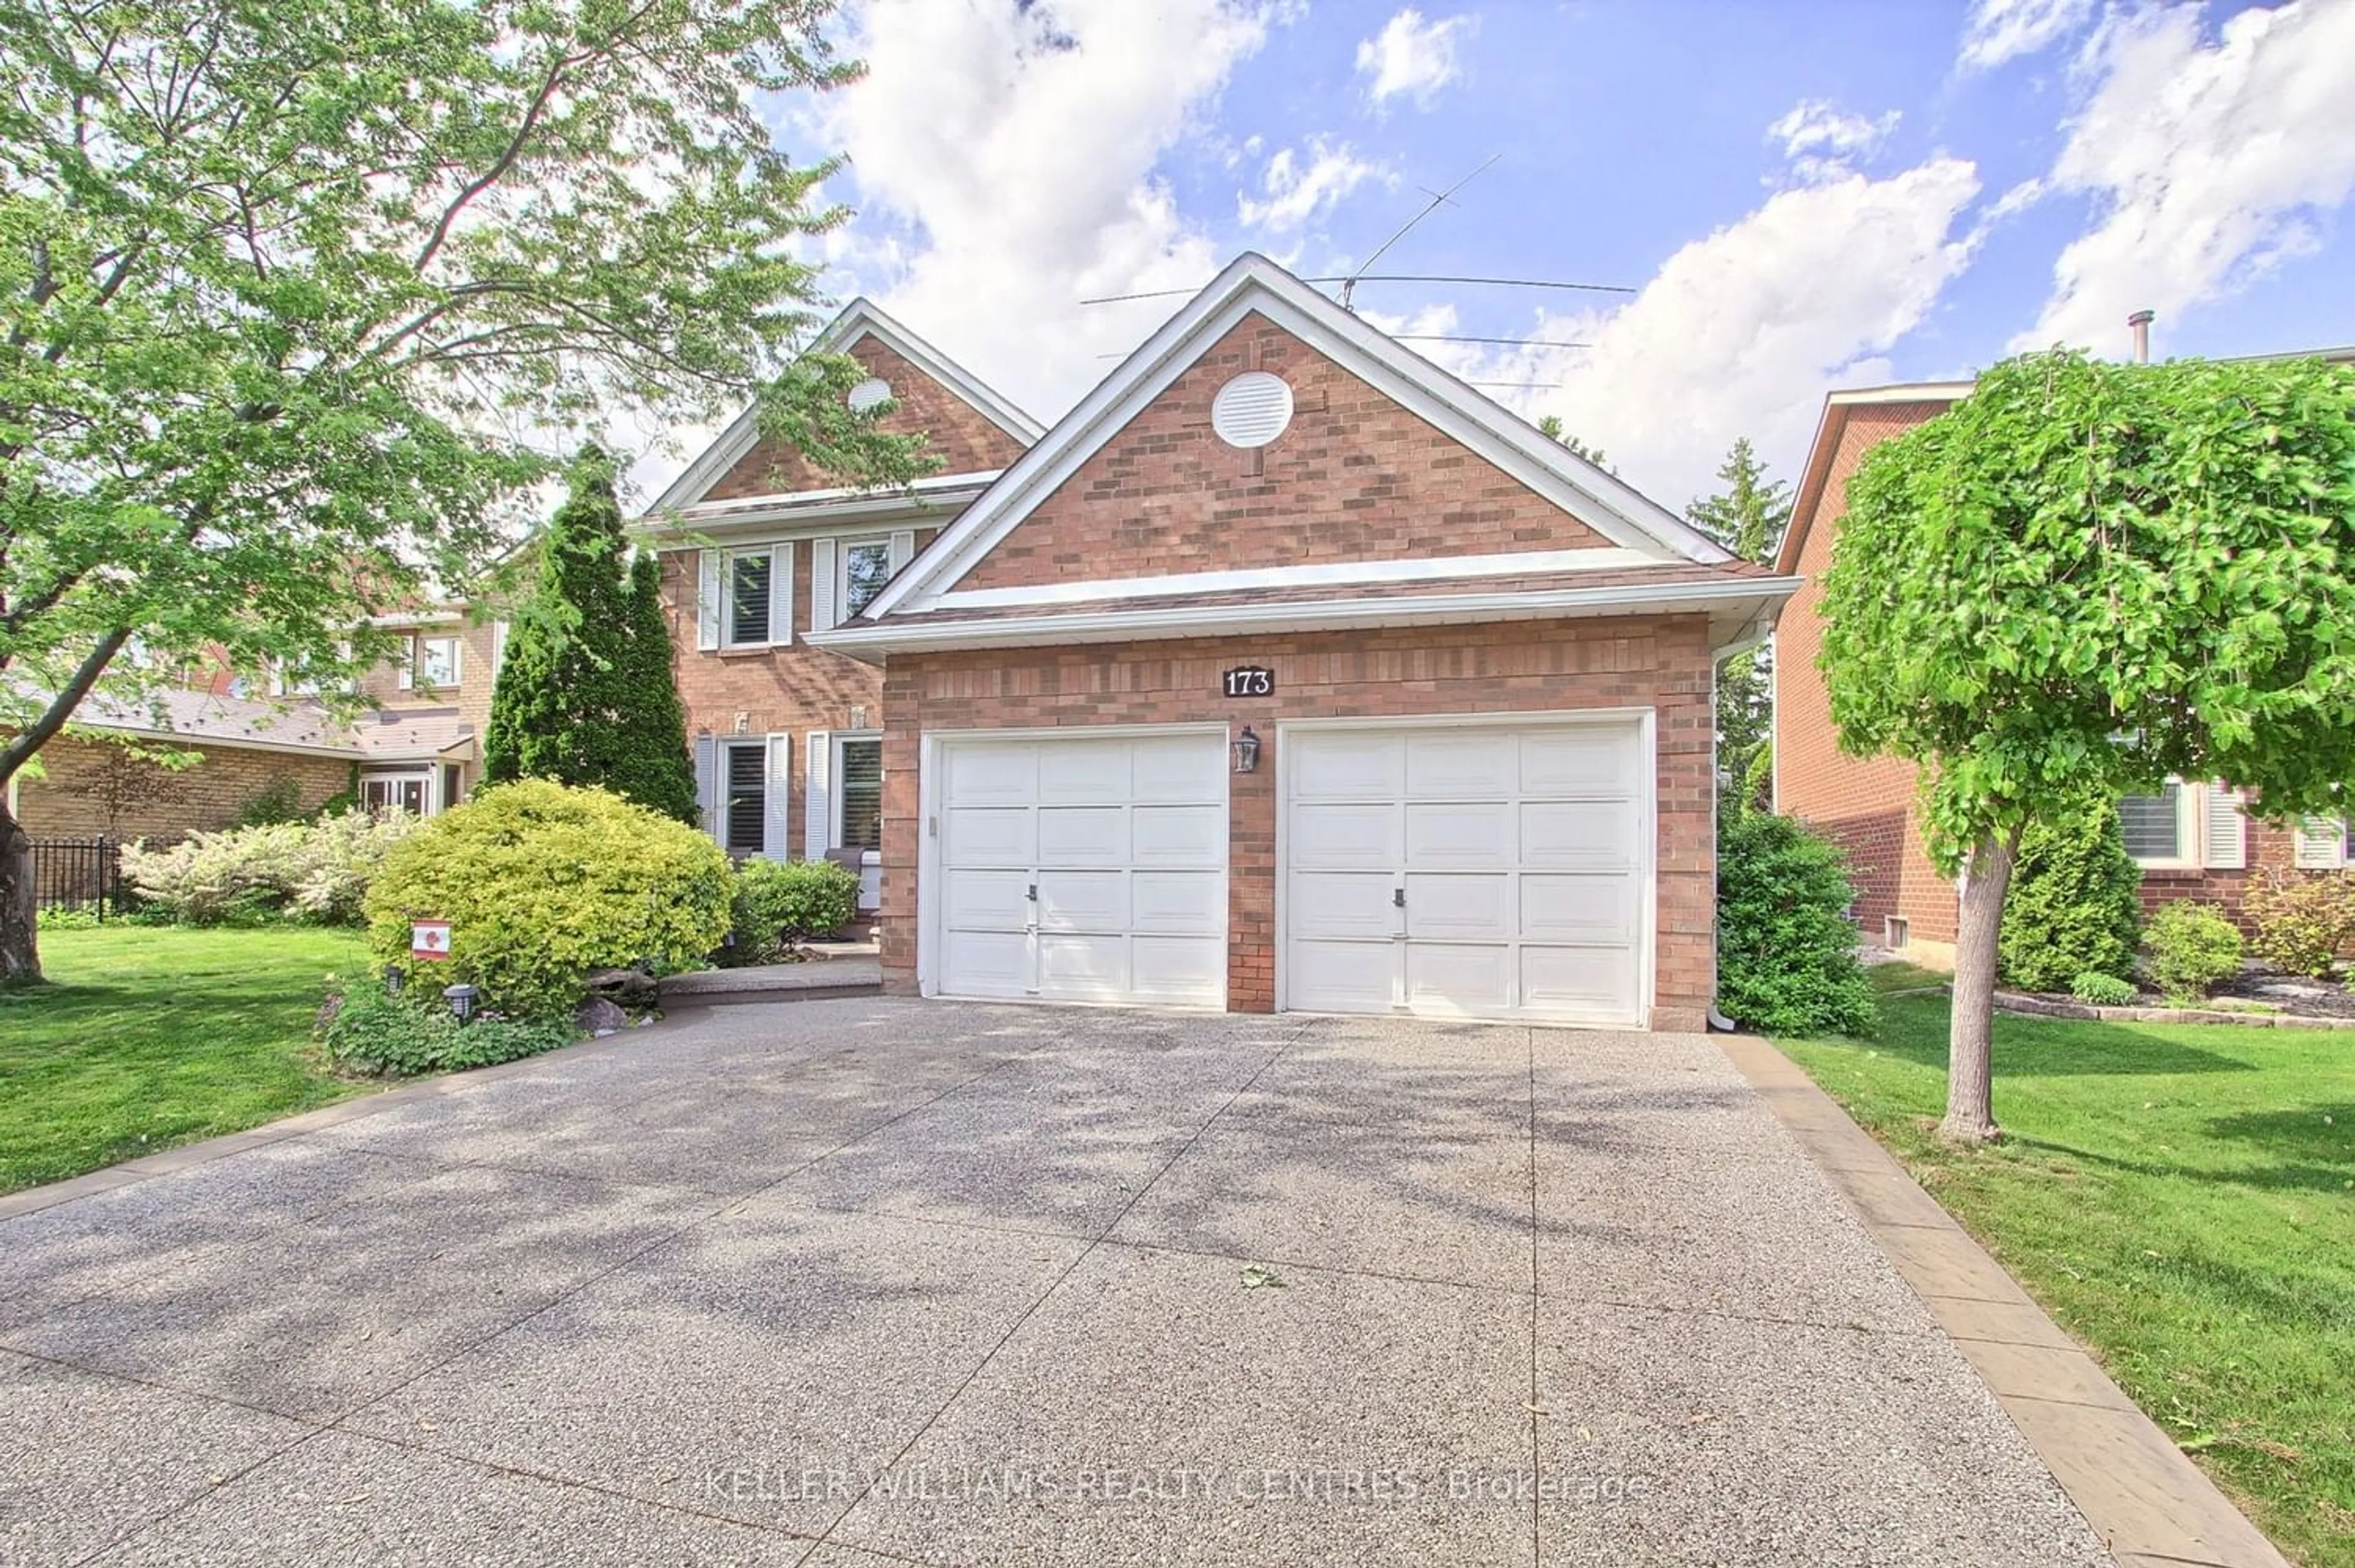 Home with brick exterior material for 173 River Oaks Blvd, Oakville Ontario L6H 3S7